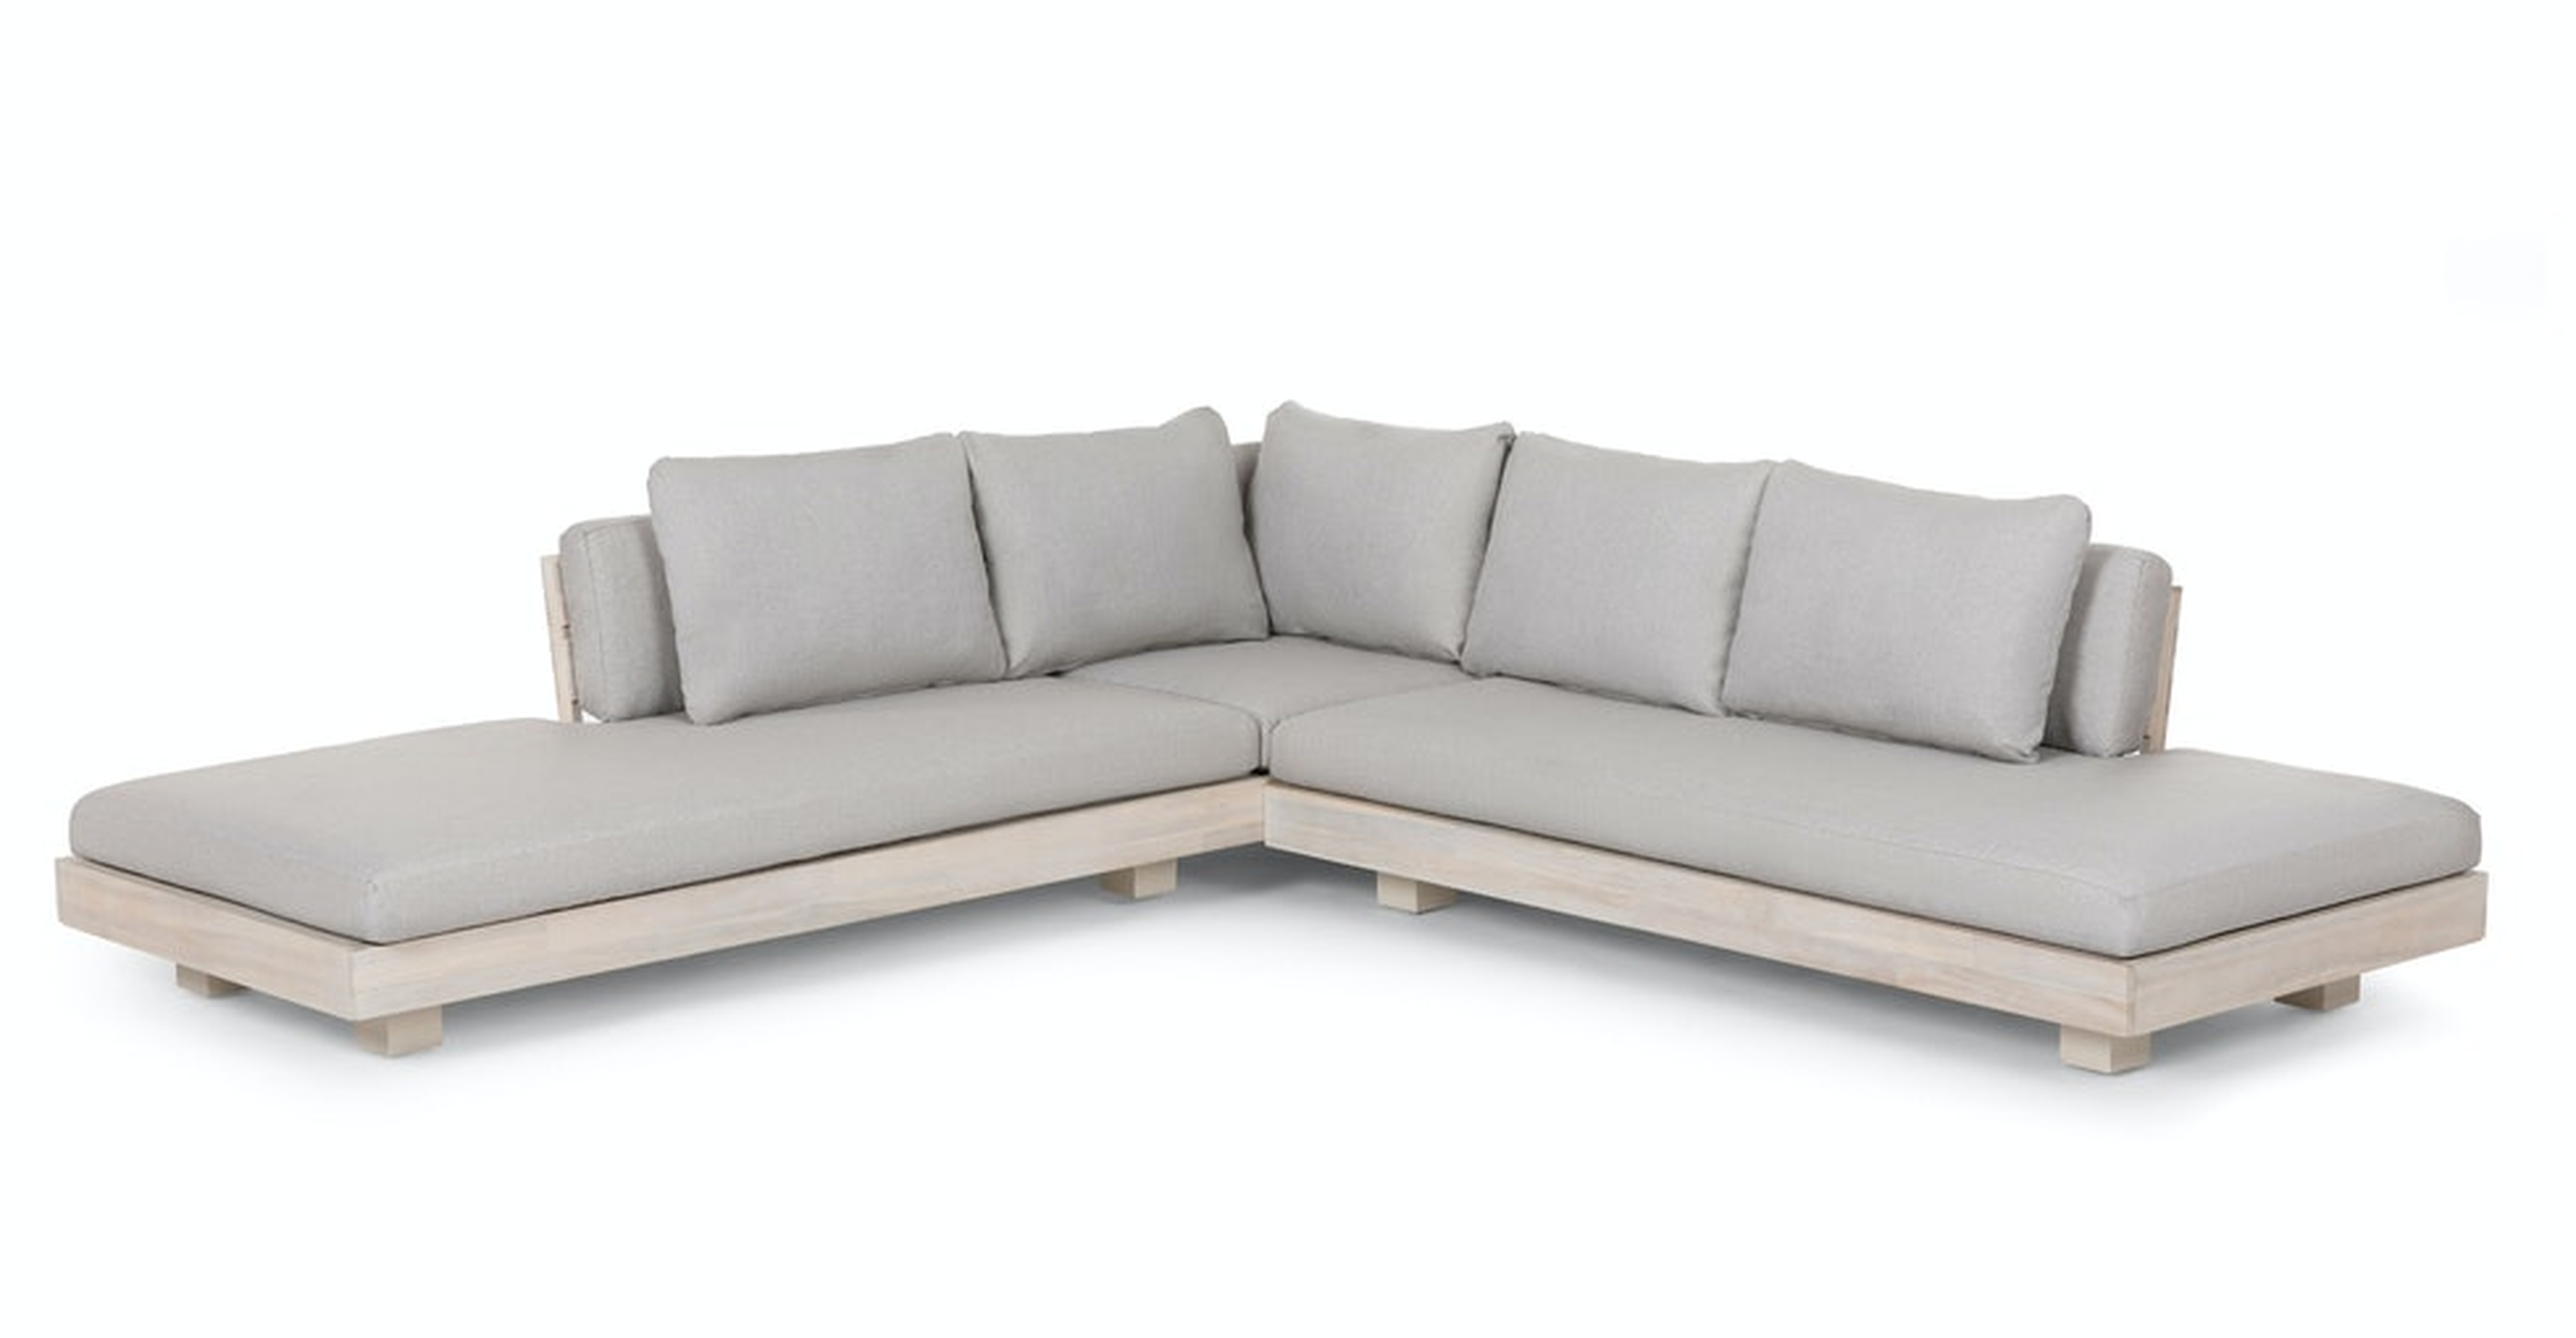 Lubek Beach Sand Low Corner Sectional - Article